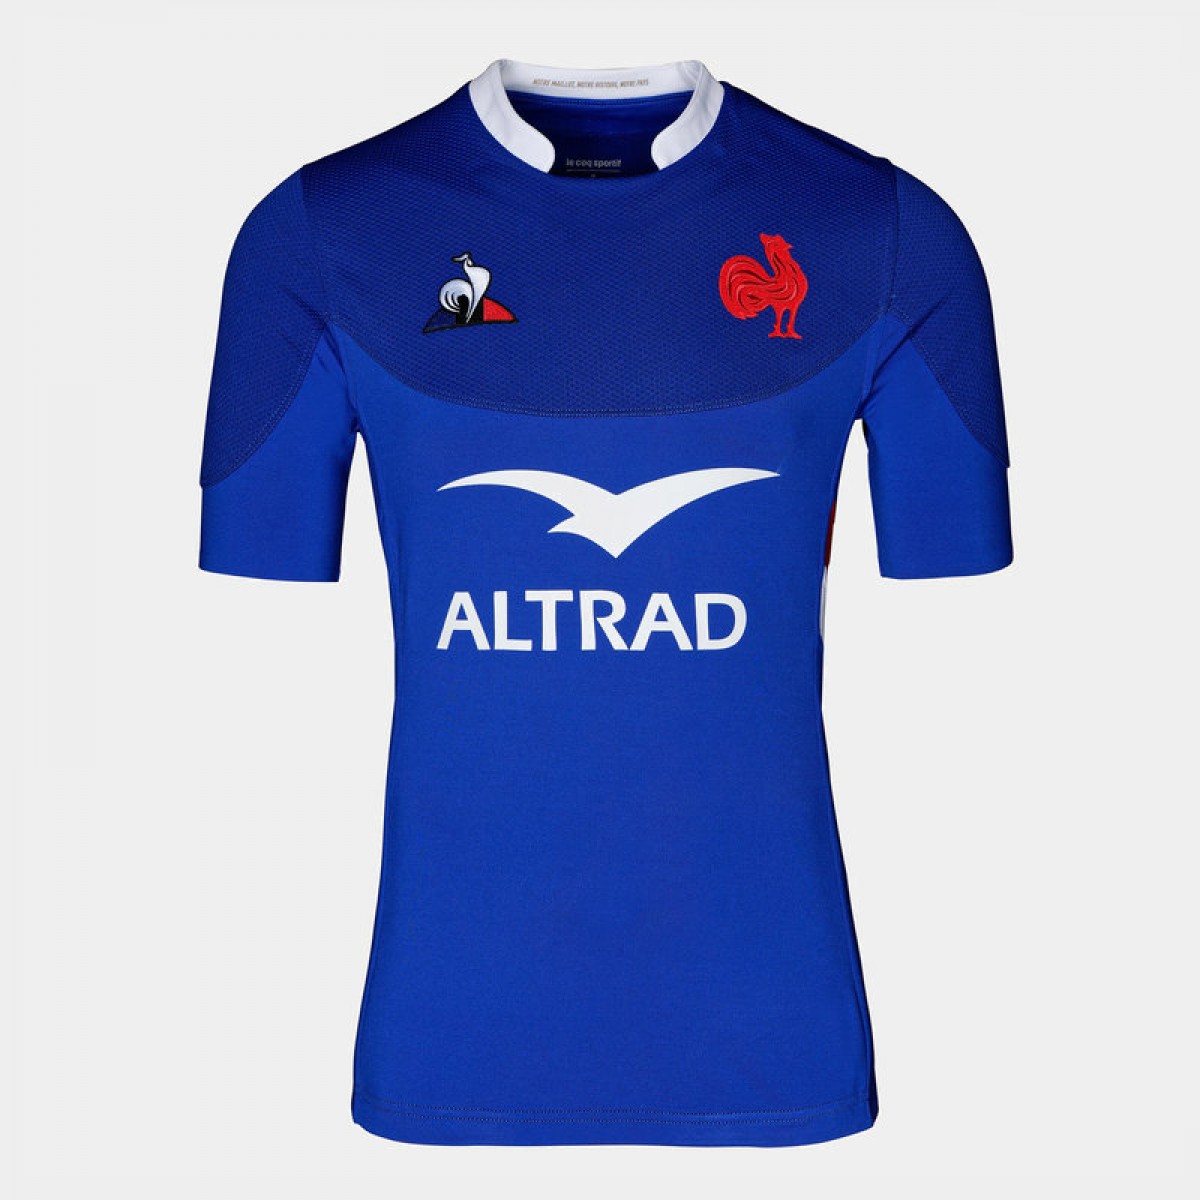 Details about   France 2020 rugby jersey shirt S-3XL 